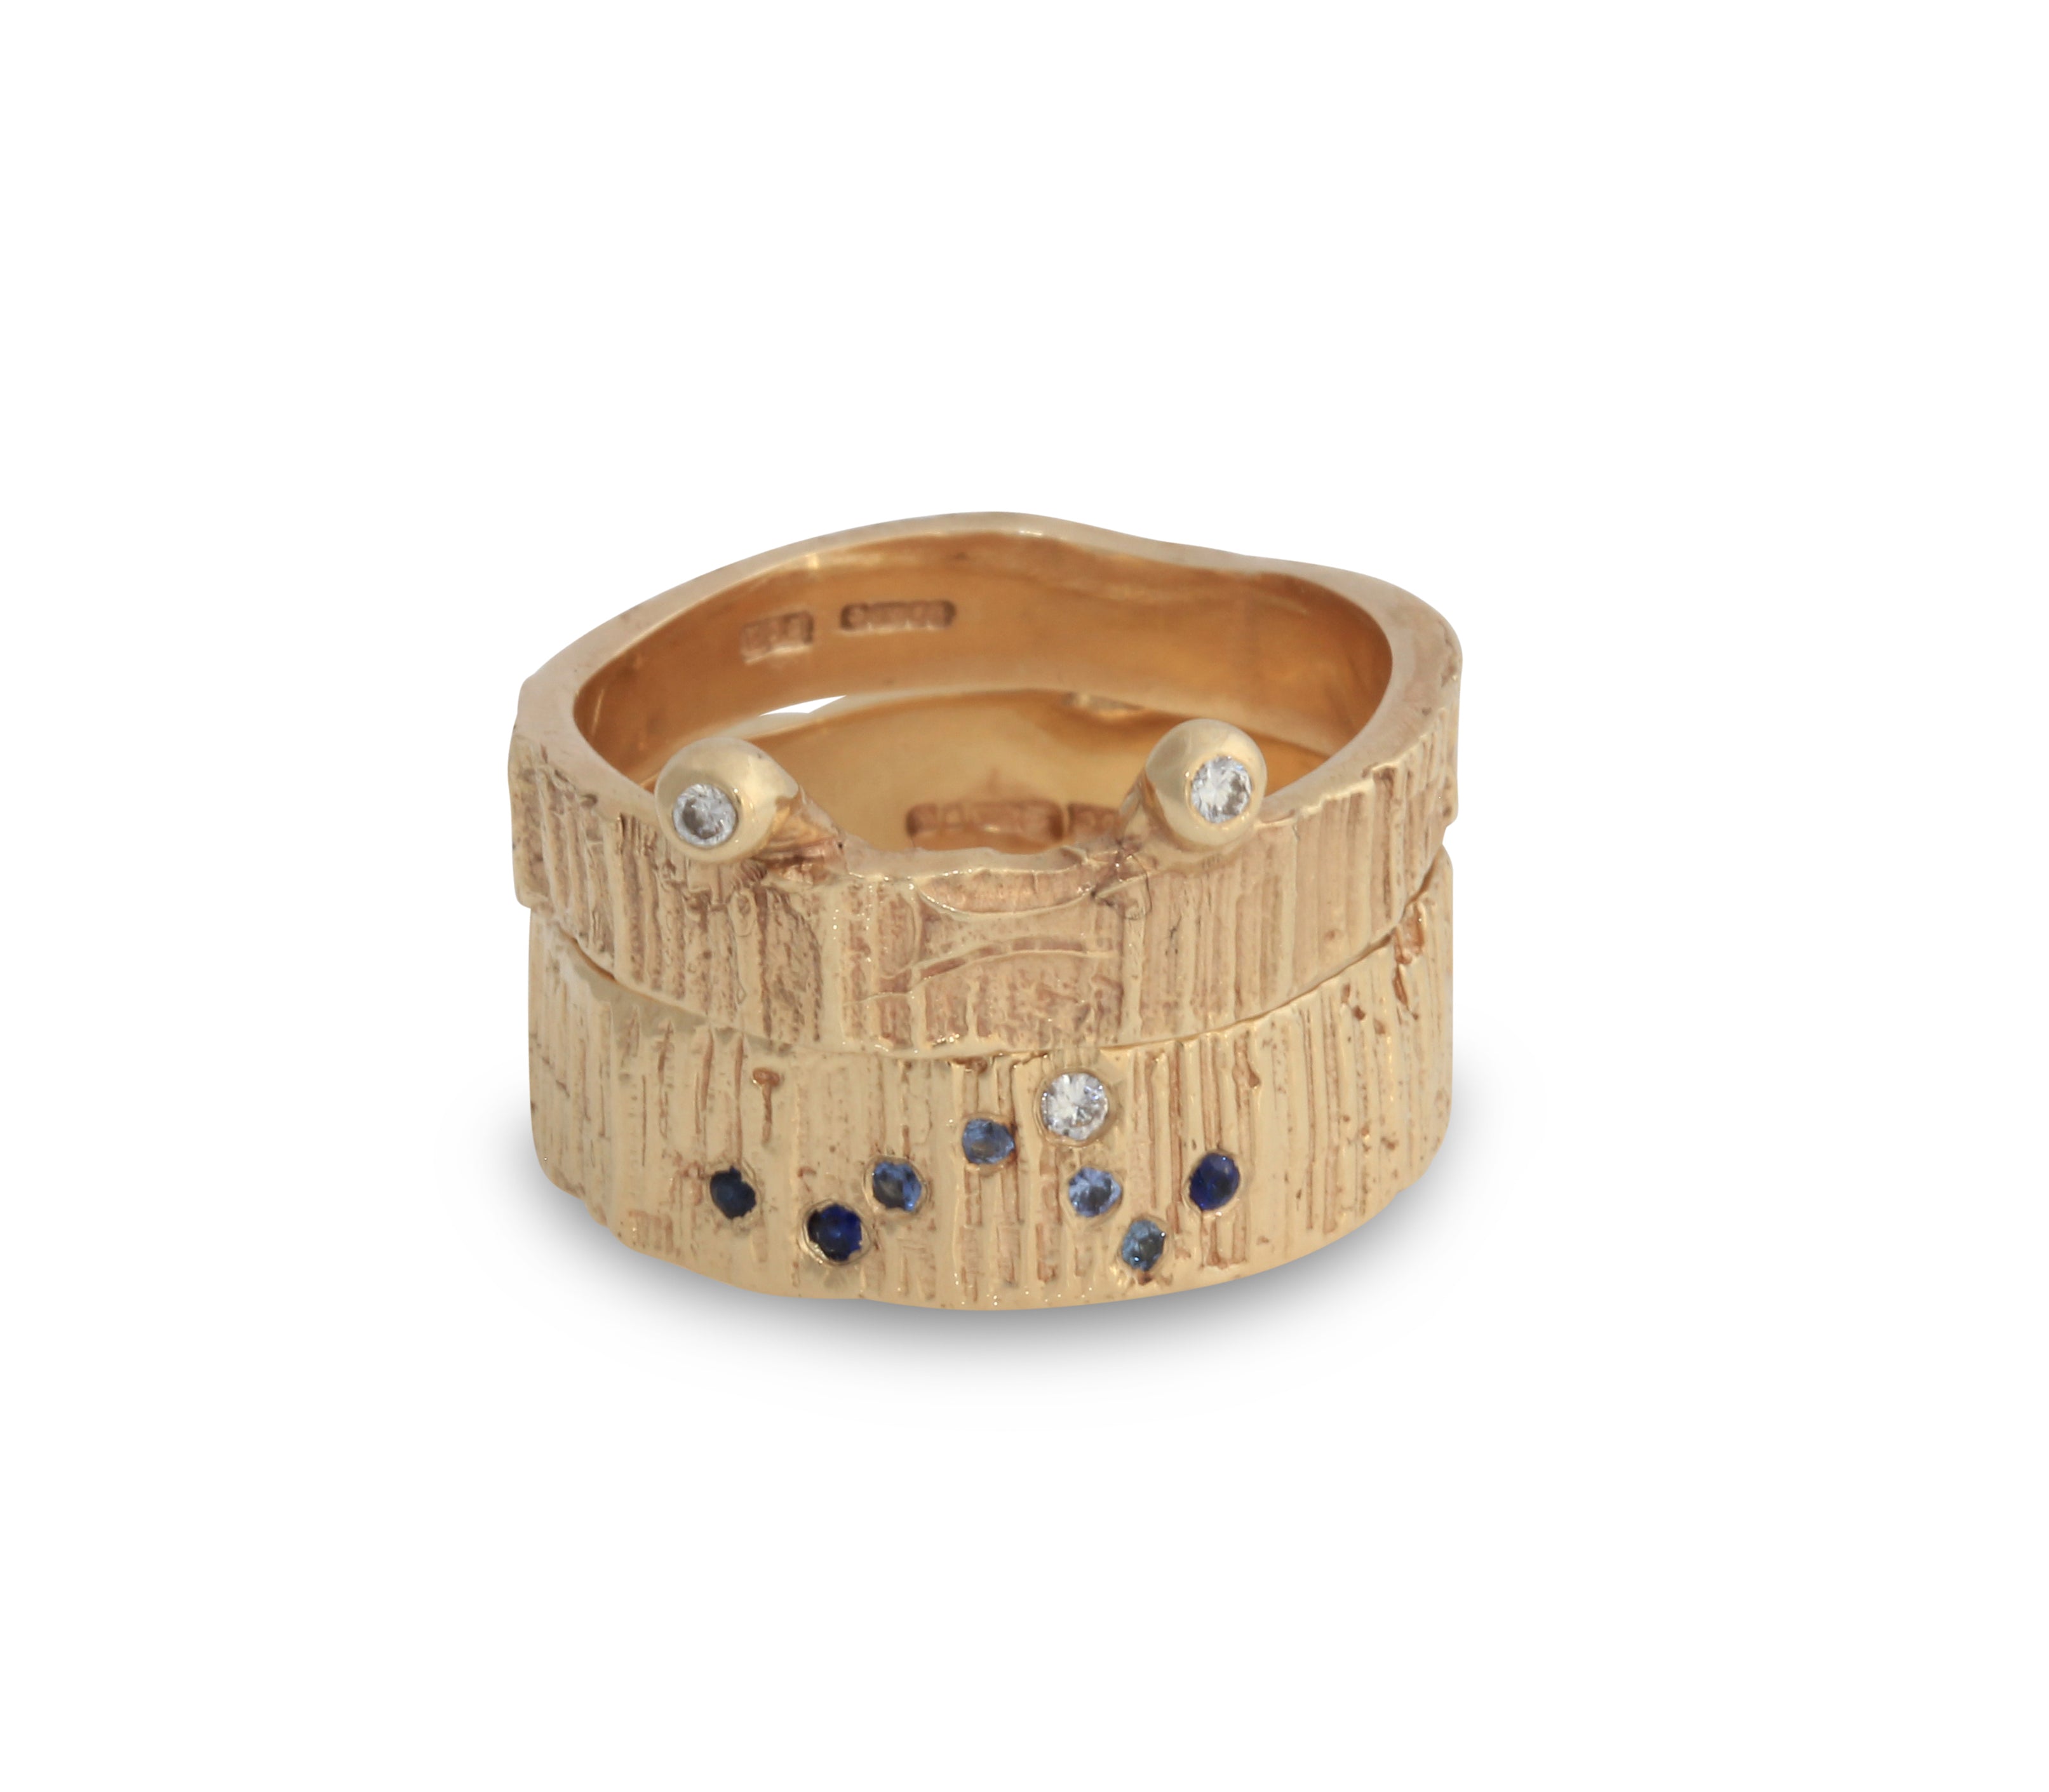 Gold rings stacked on top of one another. sapphires and diamonds set in the rings